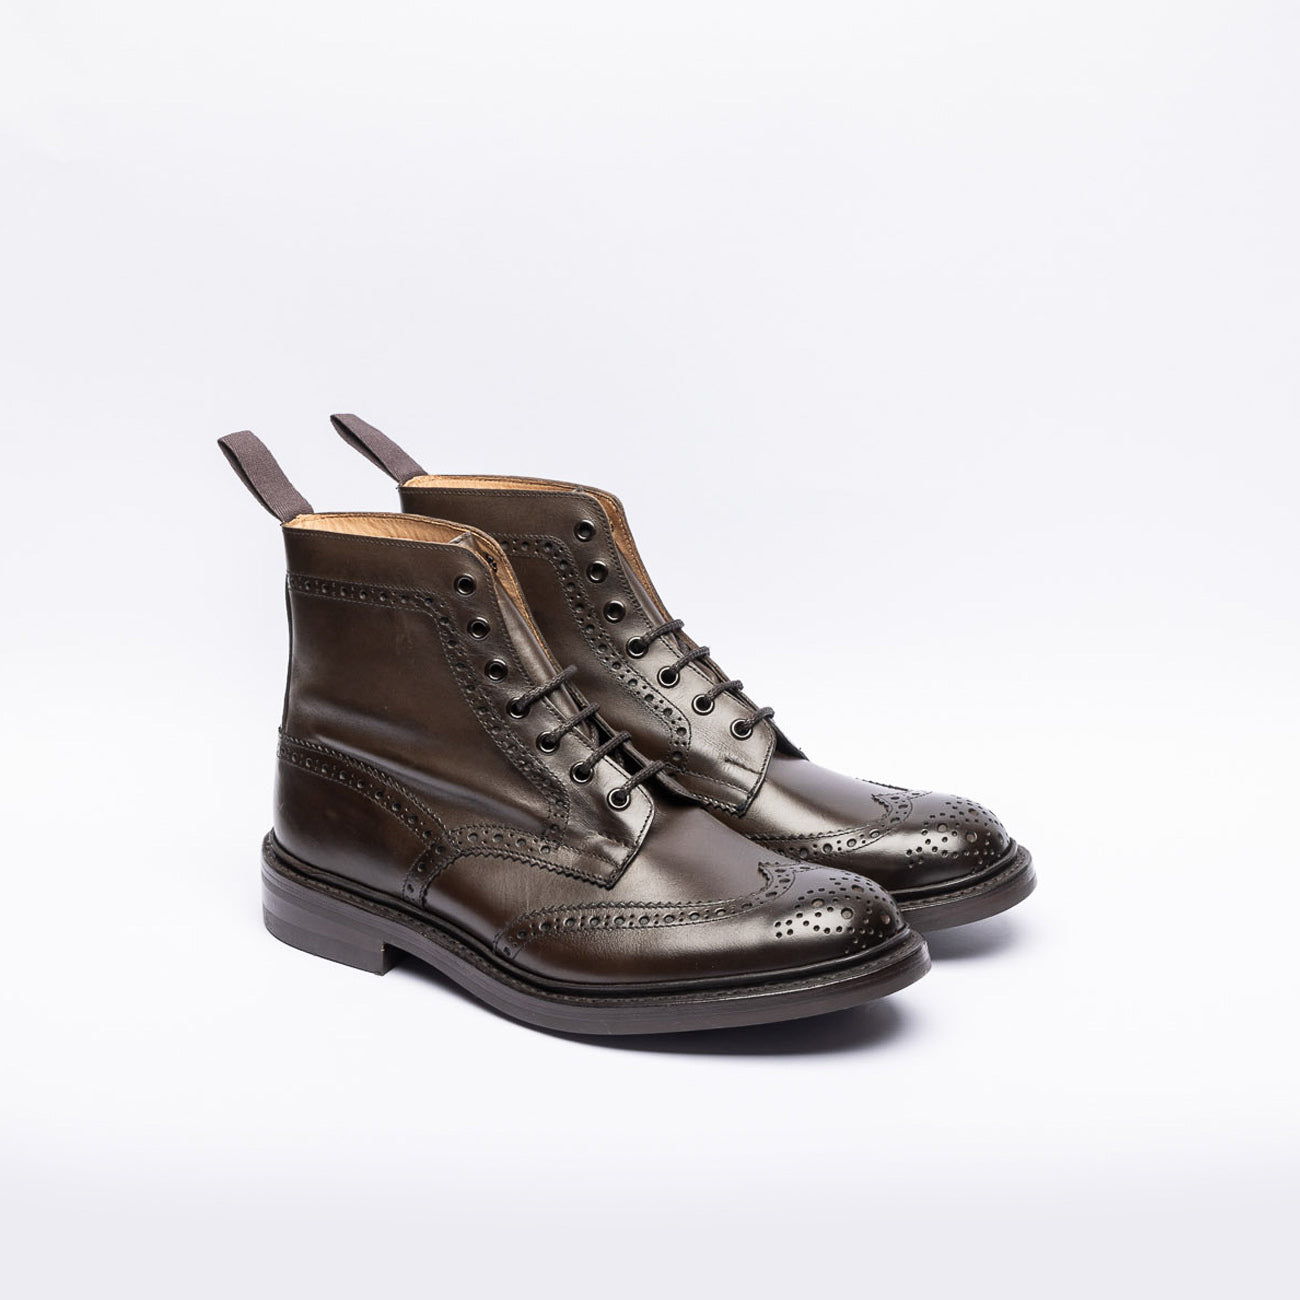 Tricker's Stow derby boot in brown leather